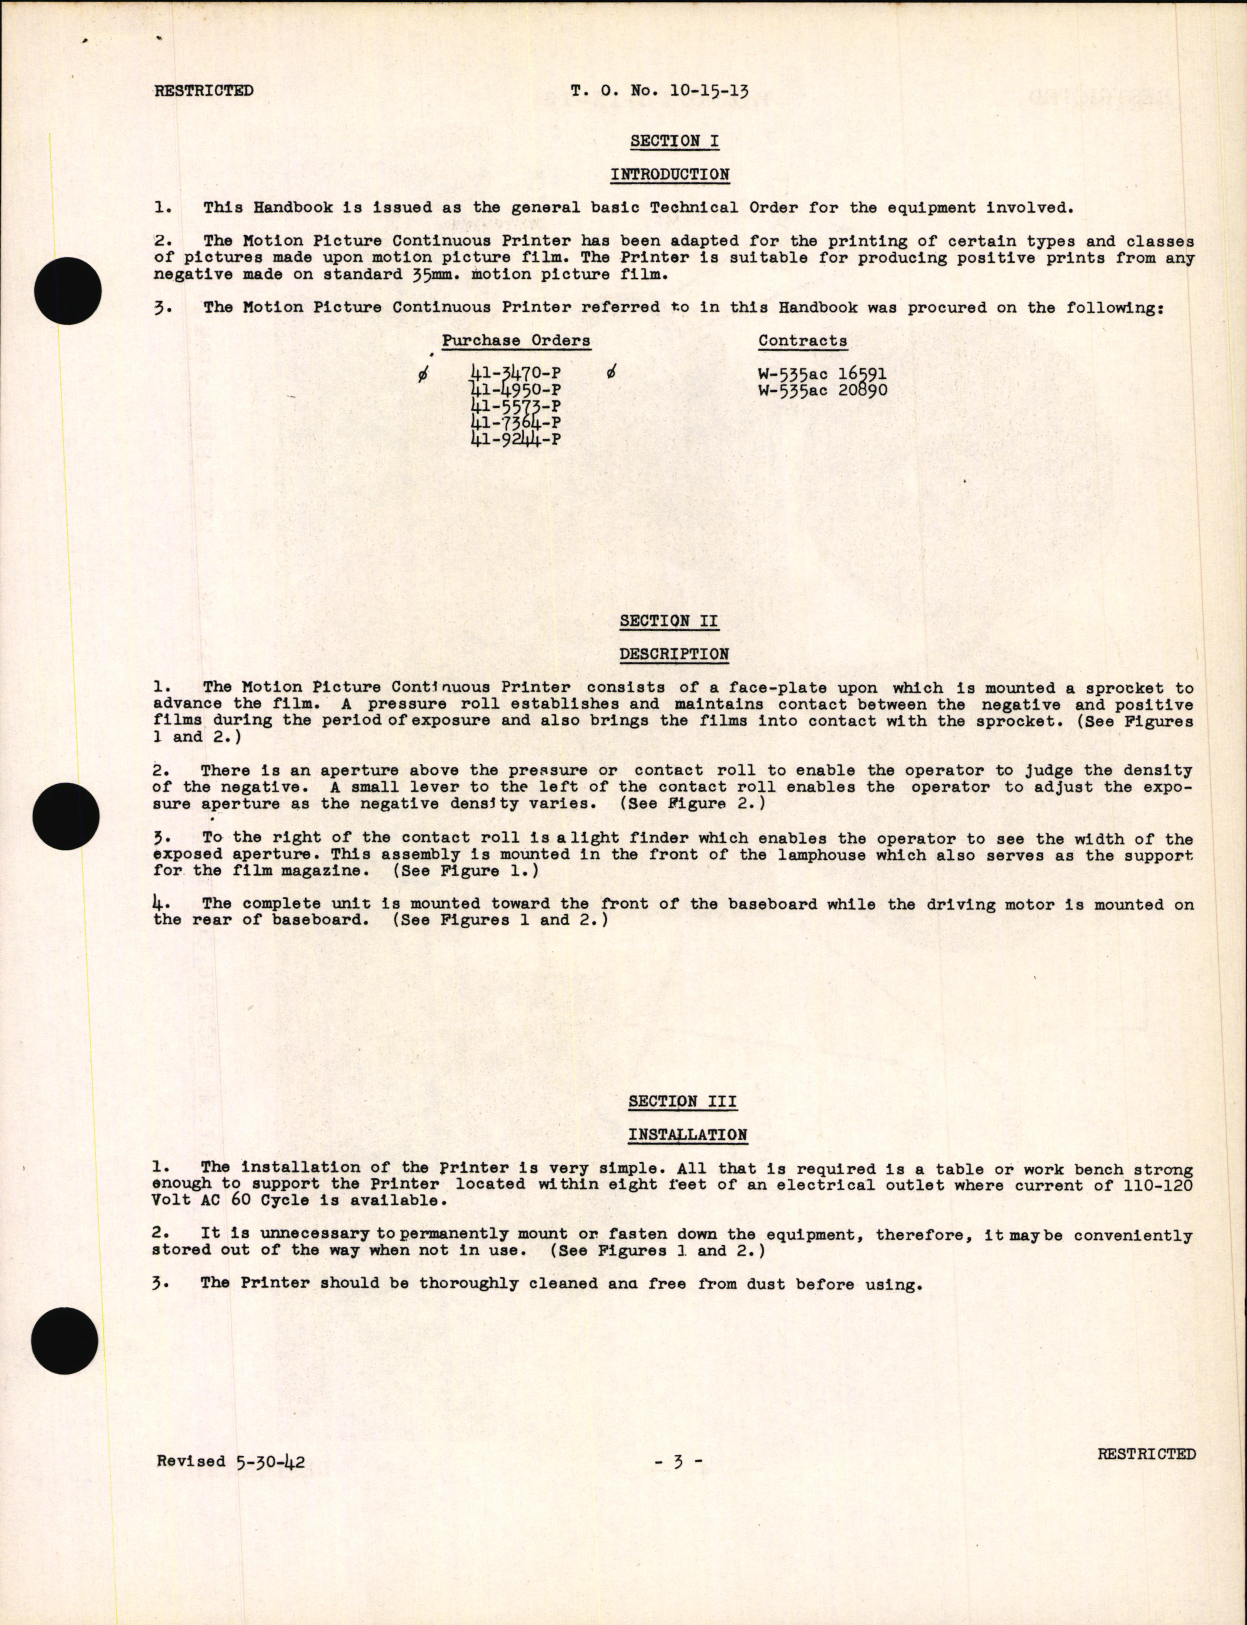 Sample page 5 from AirCorps Library document: Handbook of Instructions with Parts Catalog for the Motion Picture Continuous Printer (35 mm)